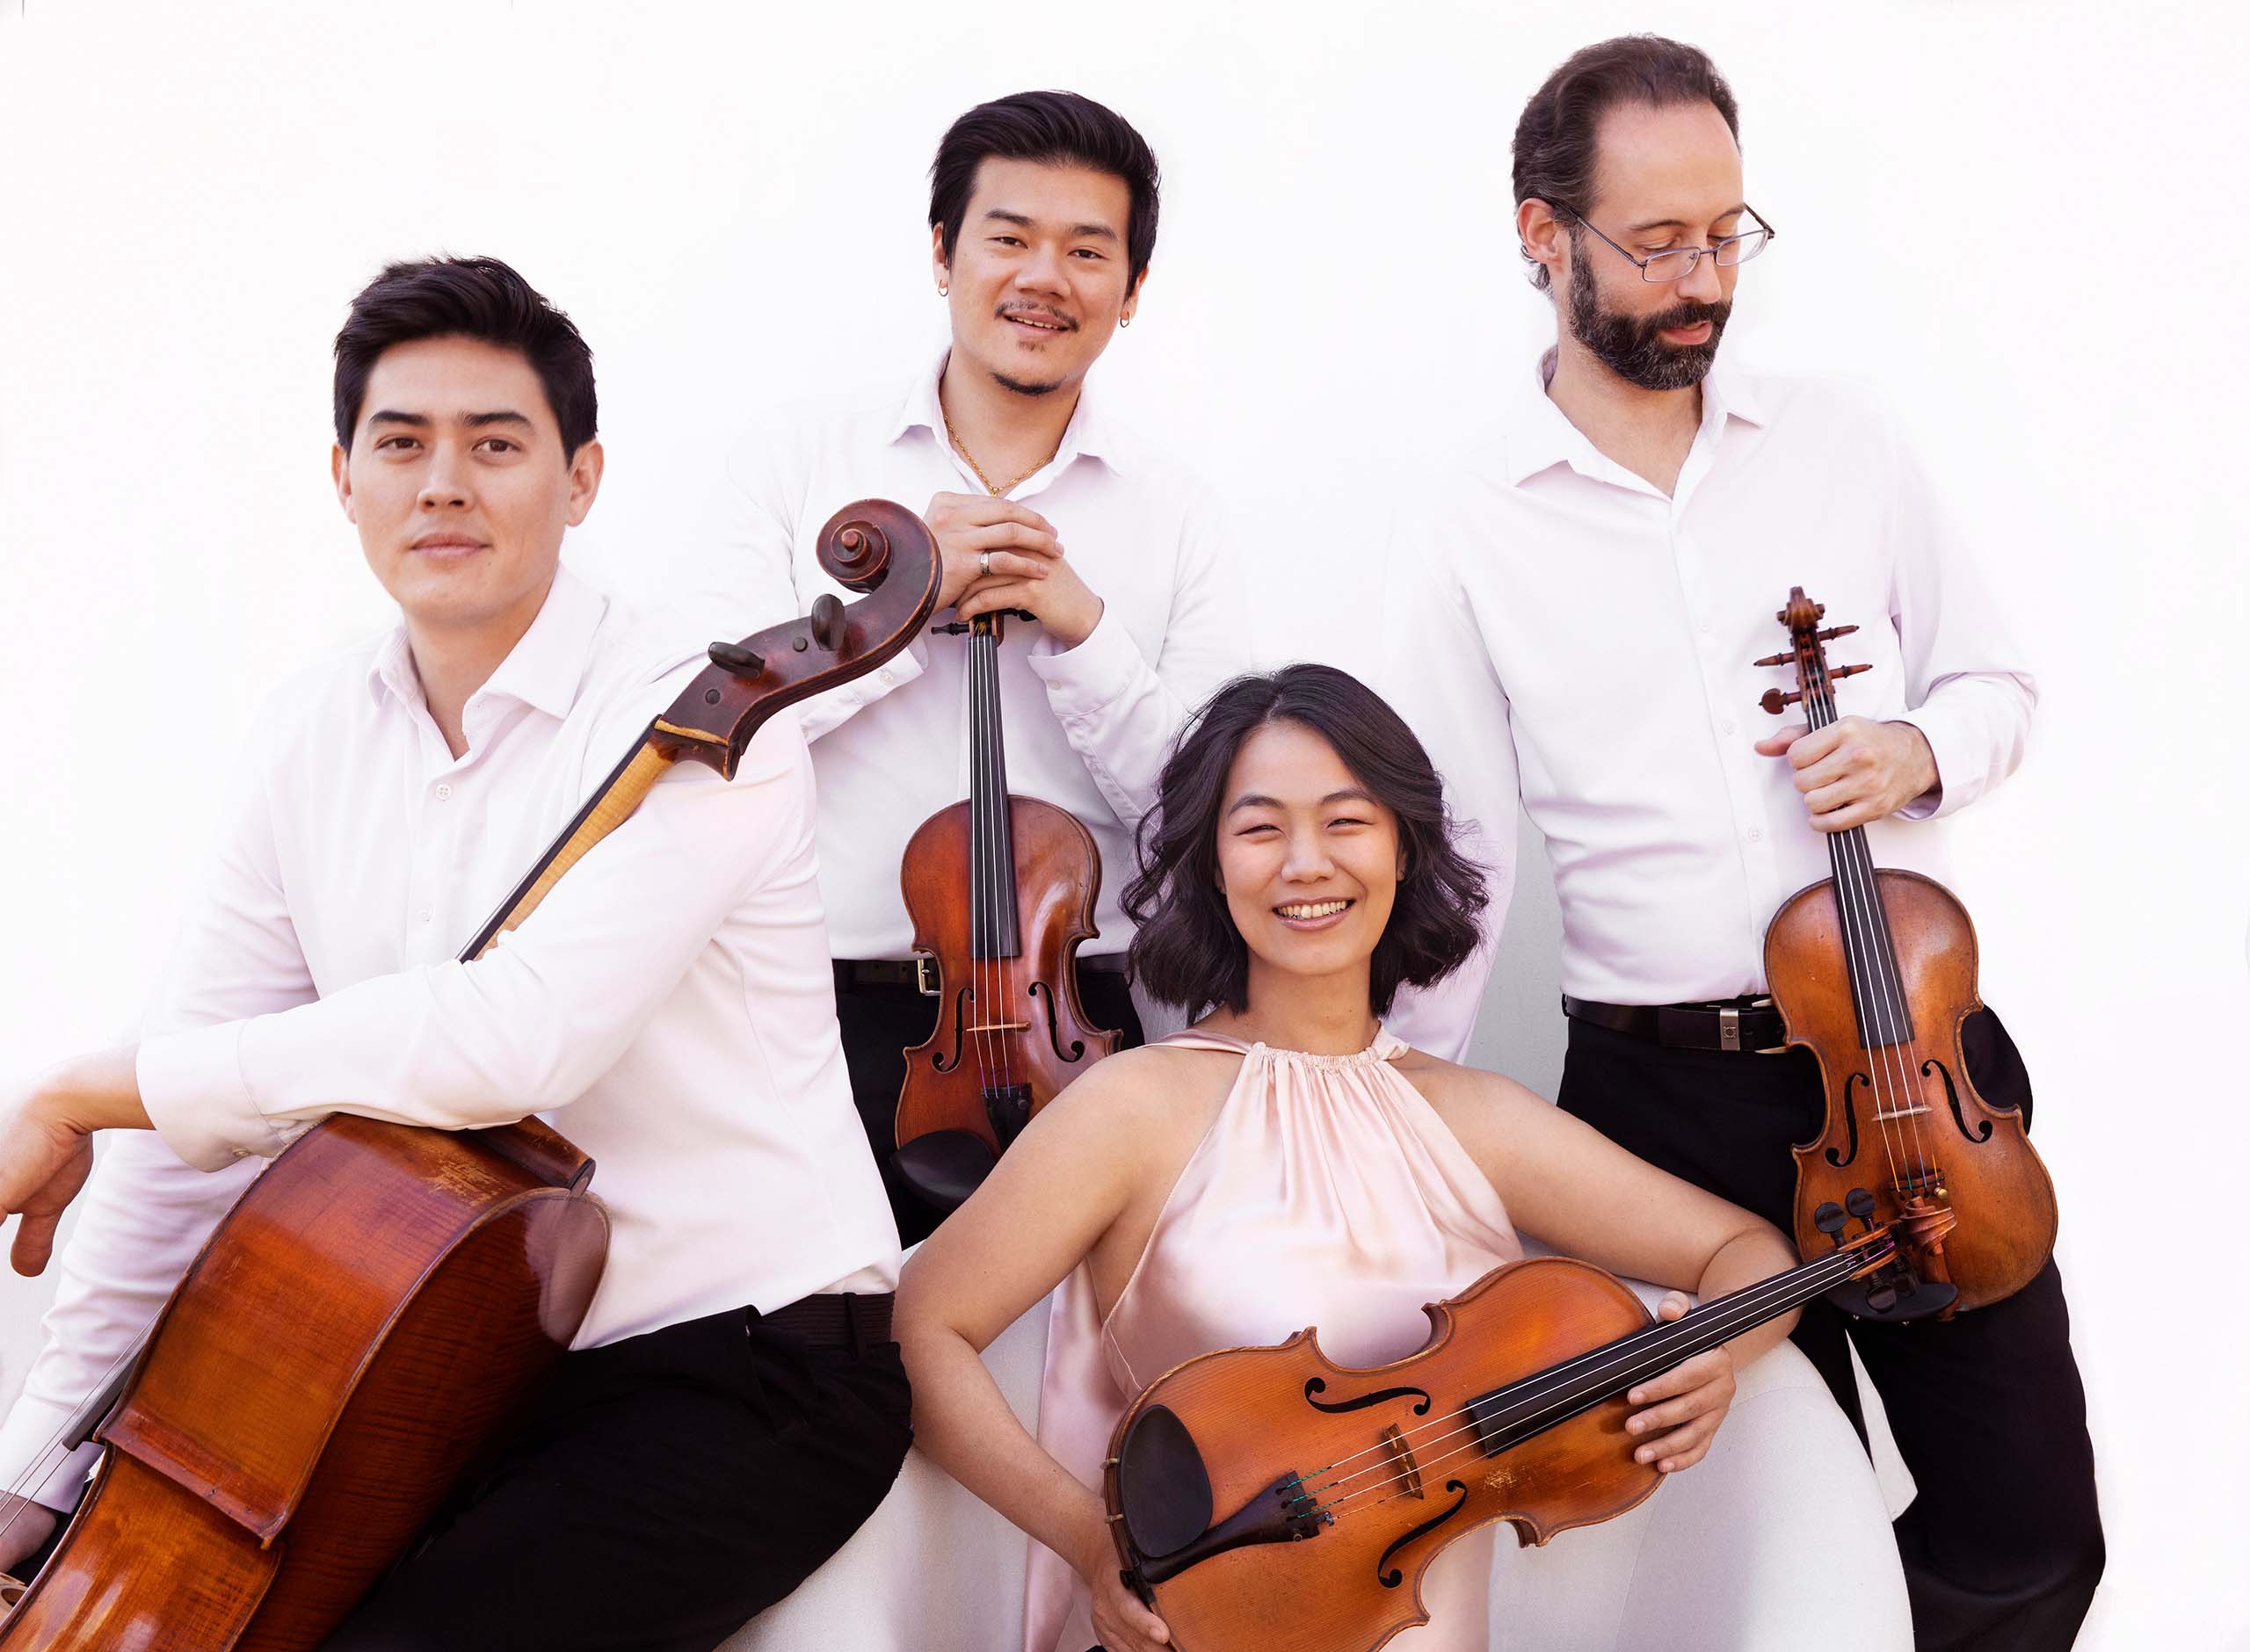 Members of the Telegraph Quartet pose holding their instruments, all wearing white with a white background.